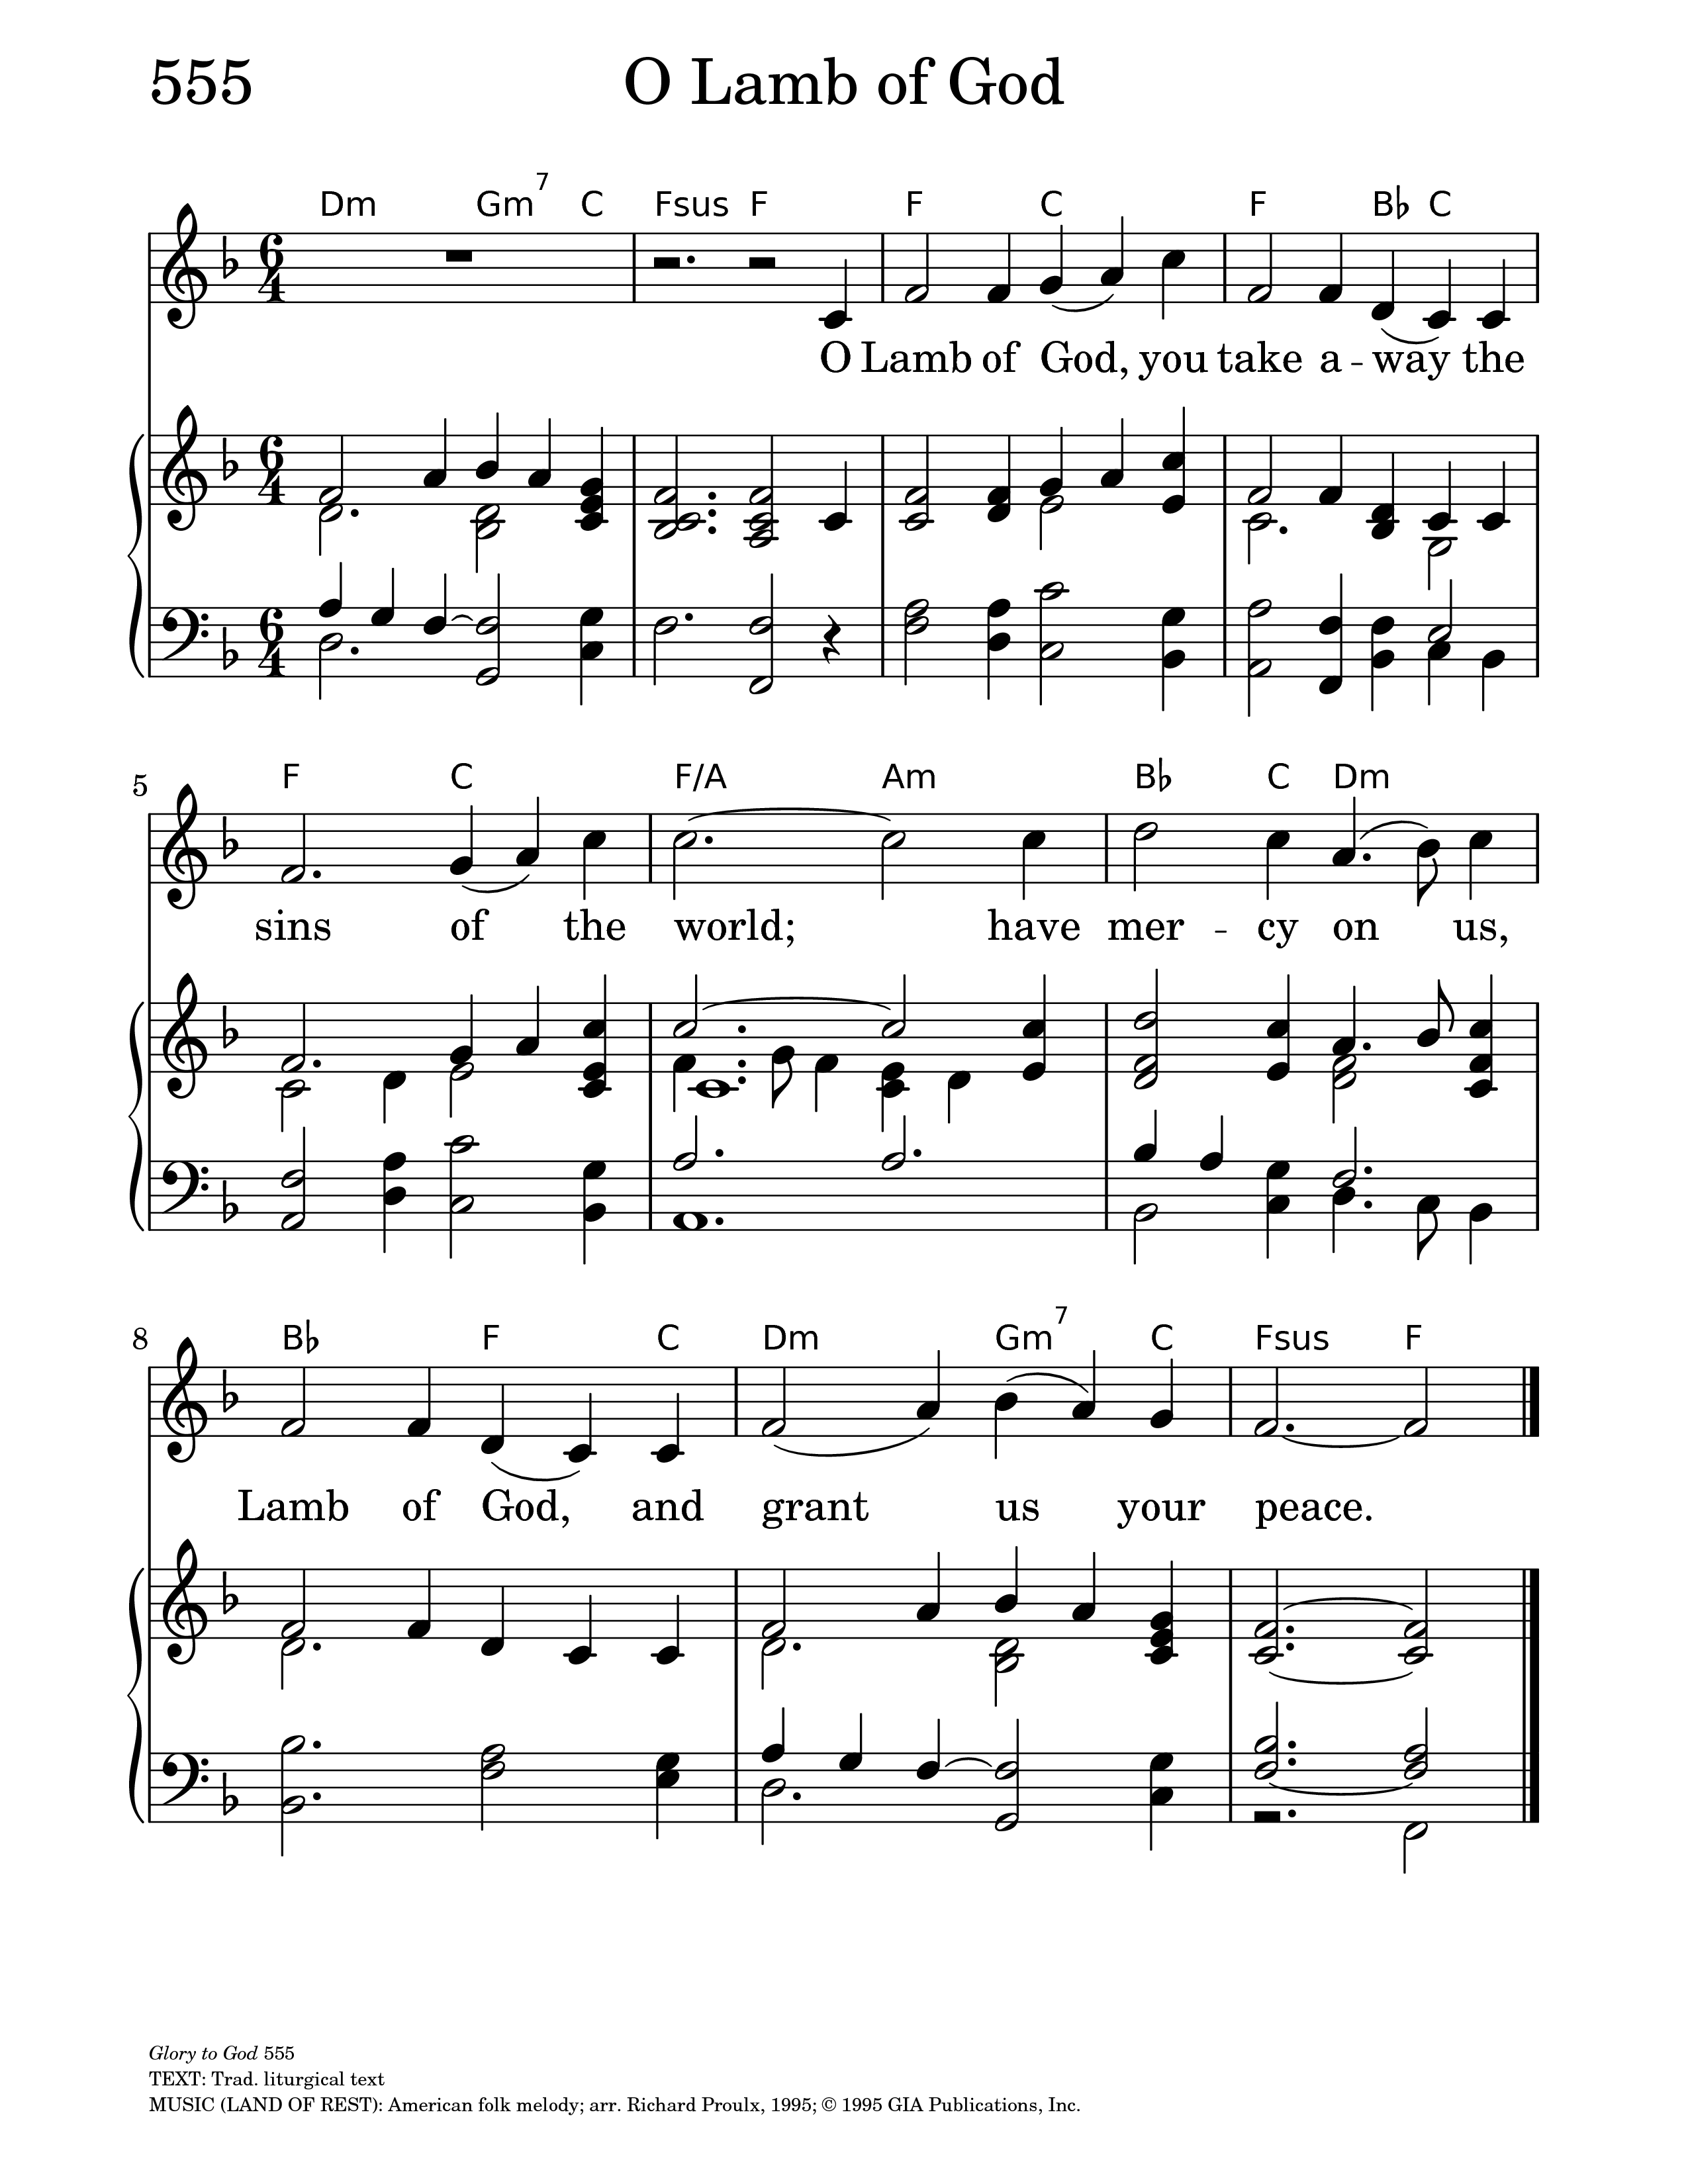 I Prevail sheet music  Play, print, and download in PDF or MIDI sheet  music on